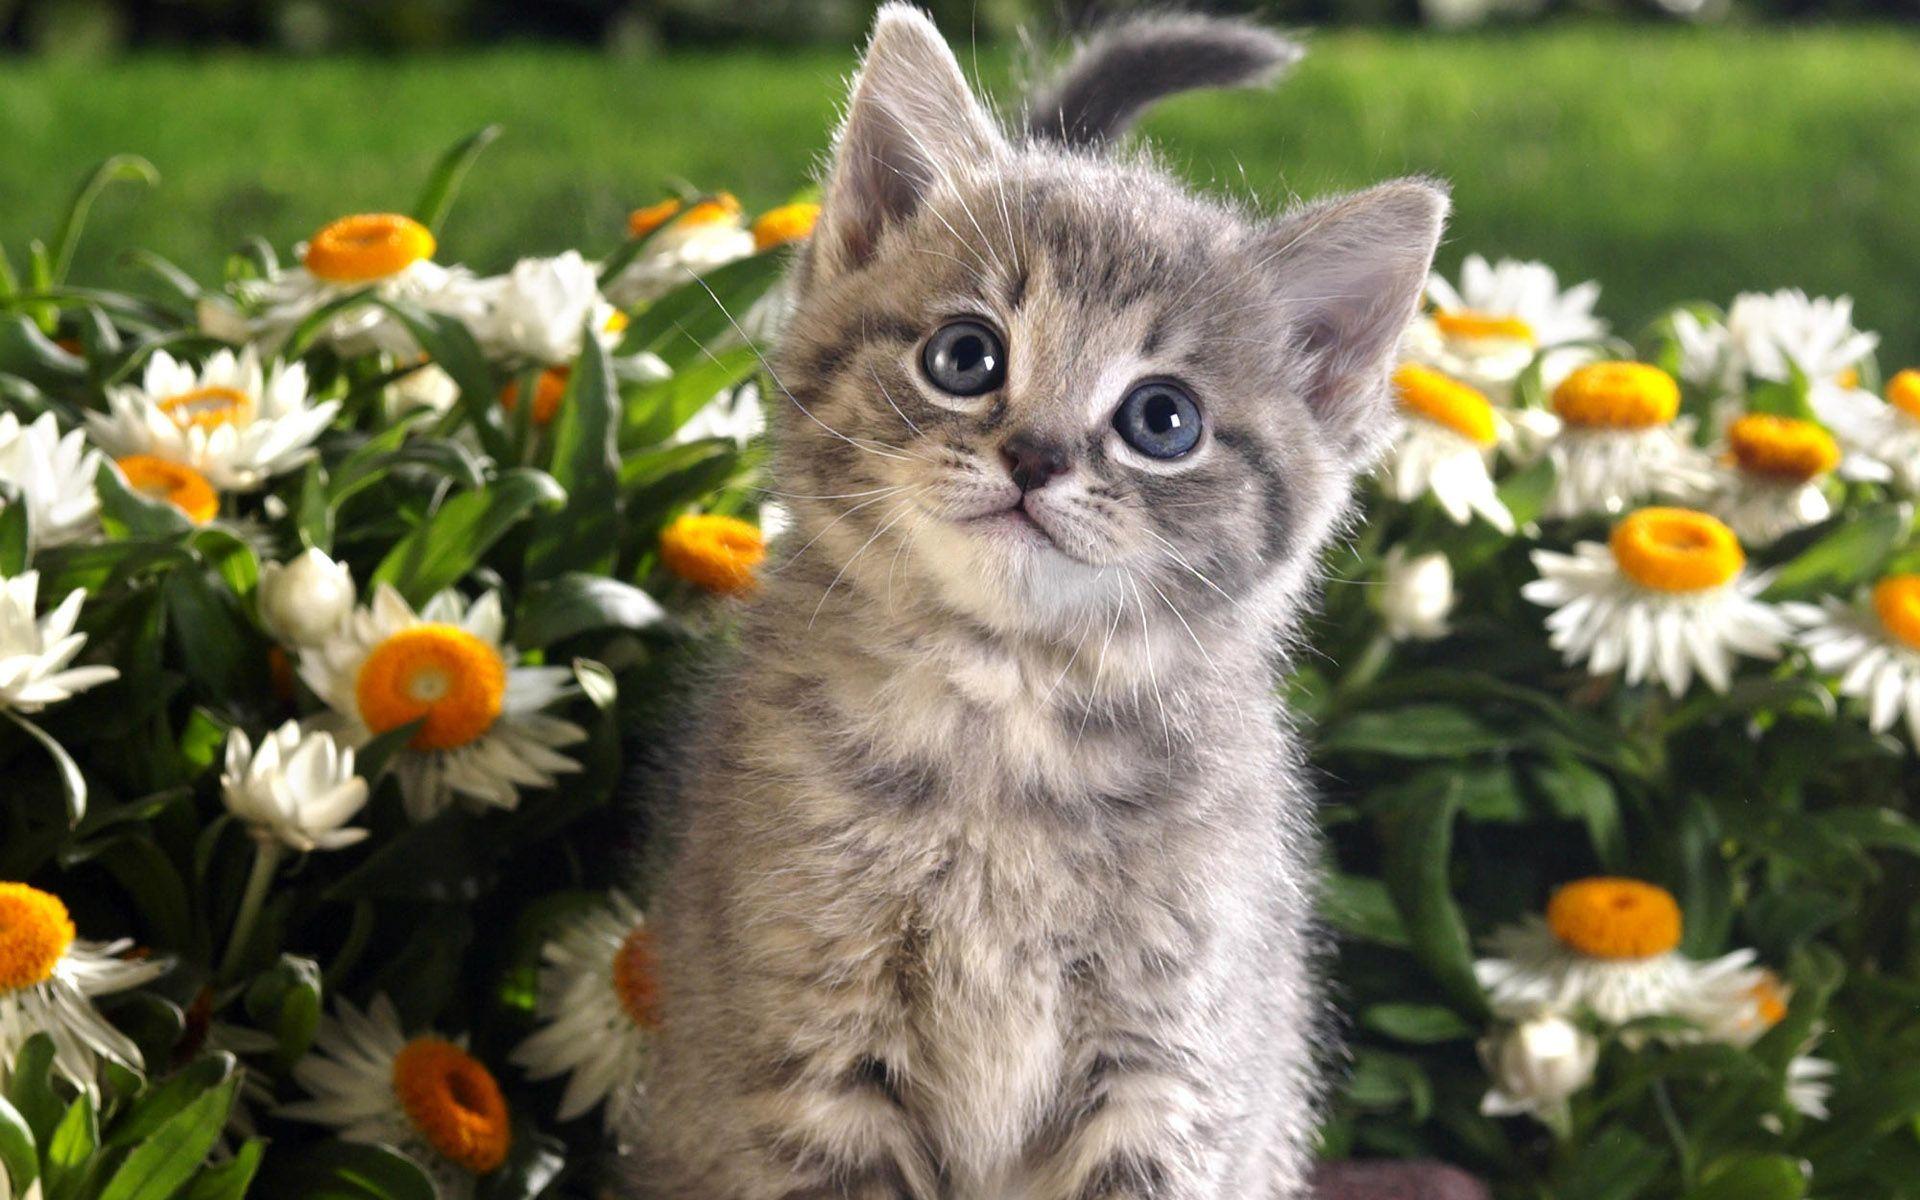 Cute Cats And Kittens Wallpapers Top Free Cute Cats And Kittens Images, Photos, Reviews